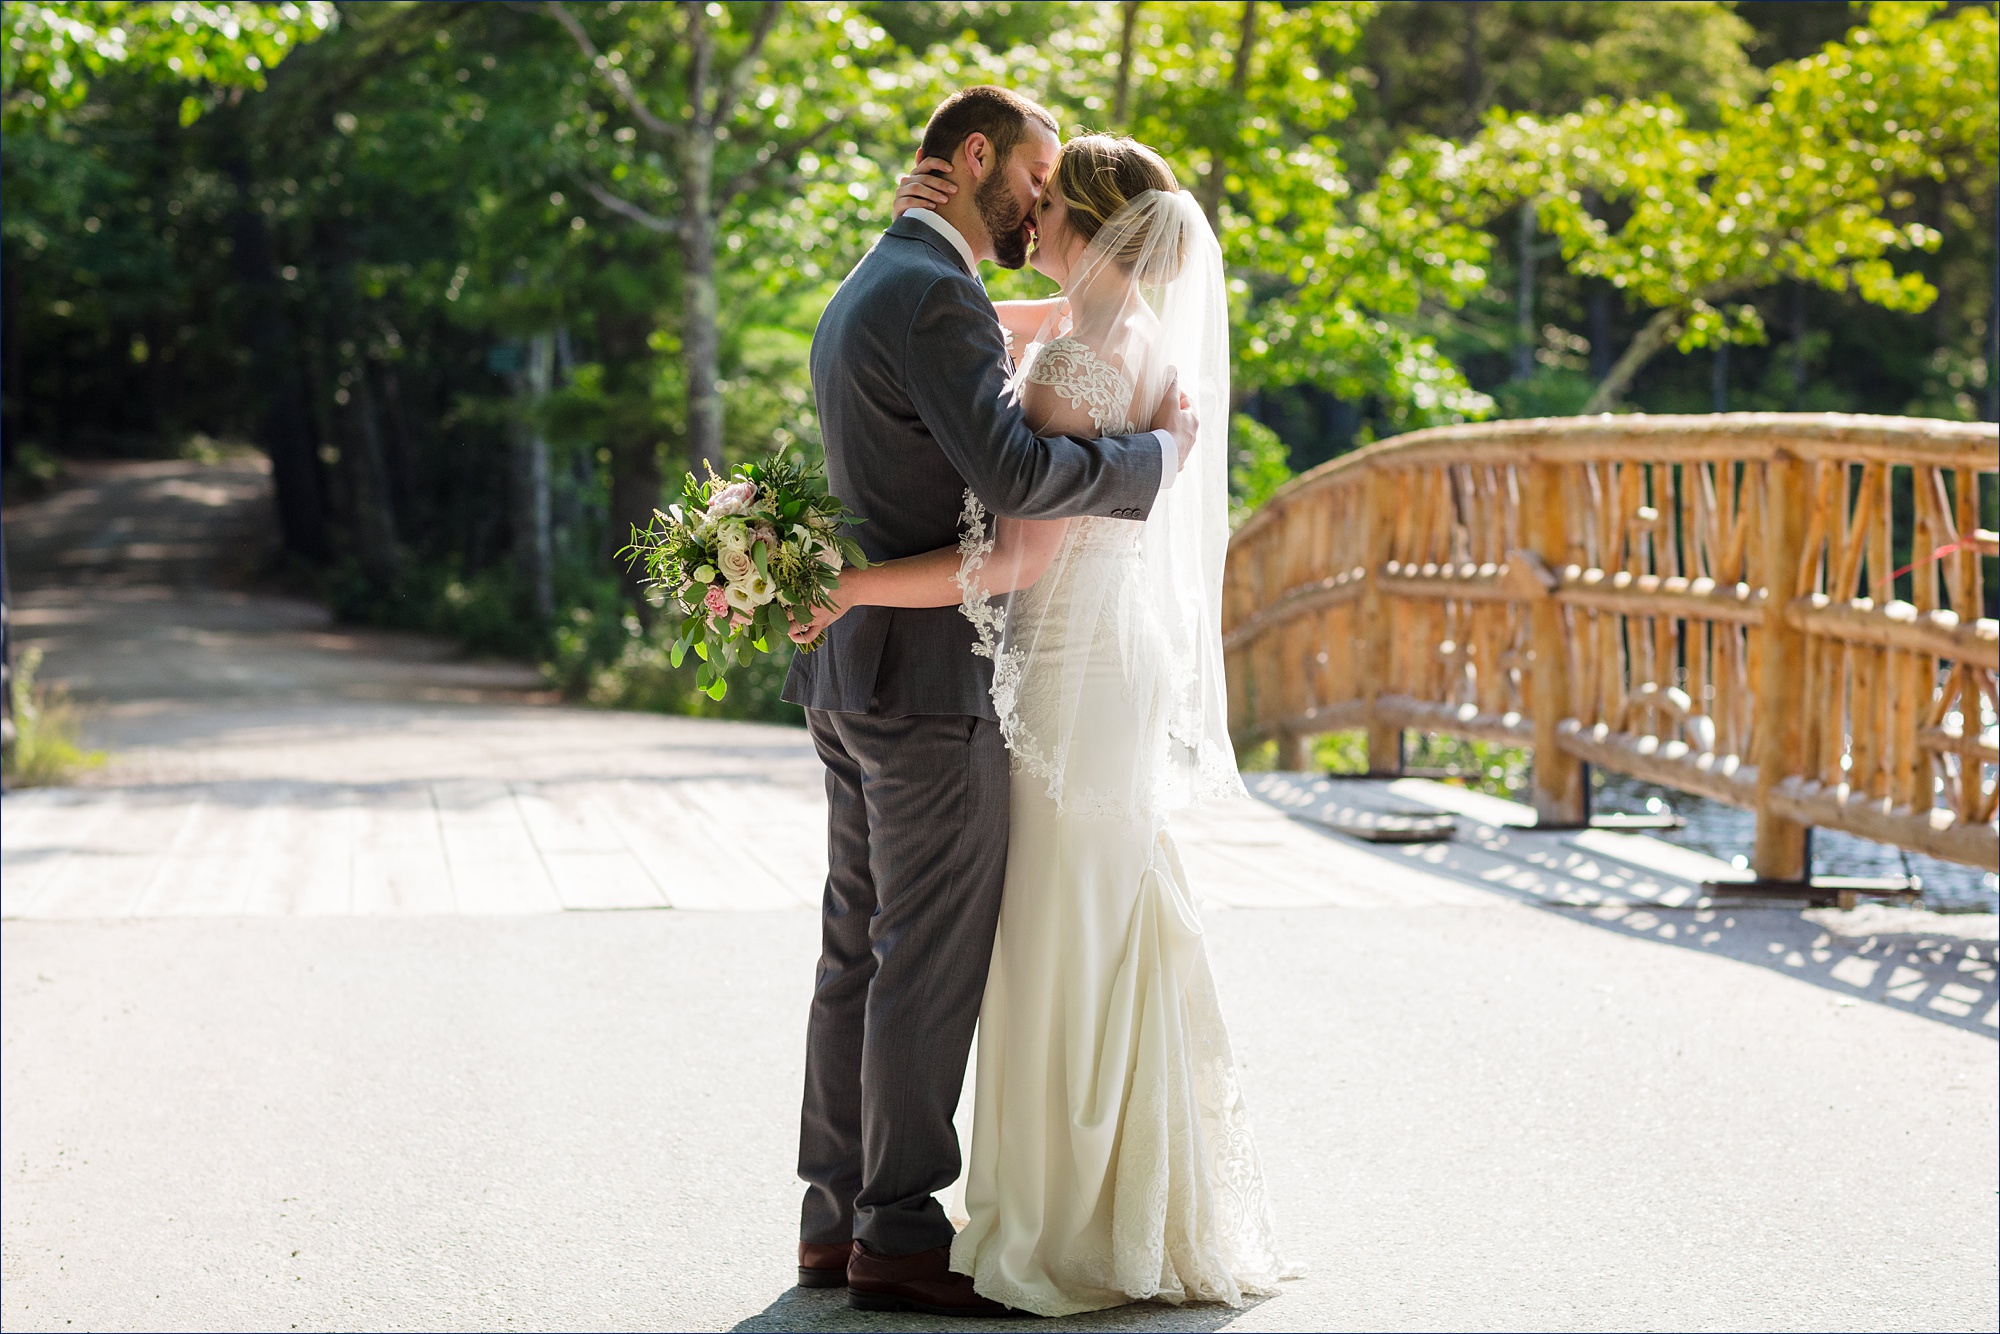 The newlyweds share a romantic kiss on the bridge over Lake Chocorua at their New Hampshire wedding day